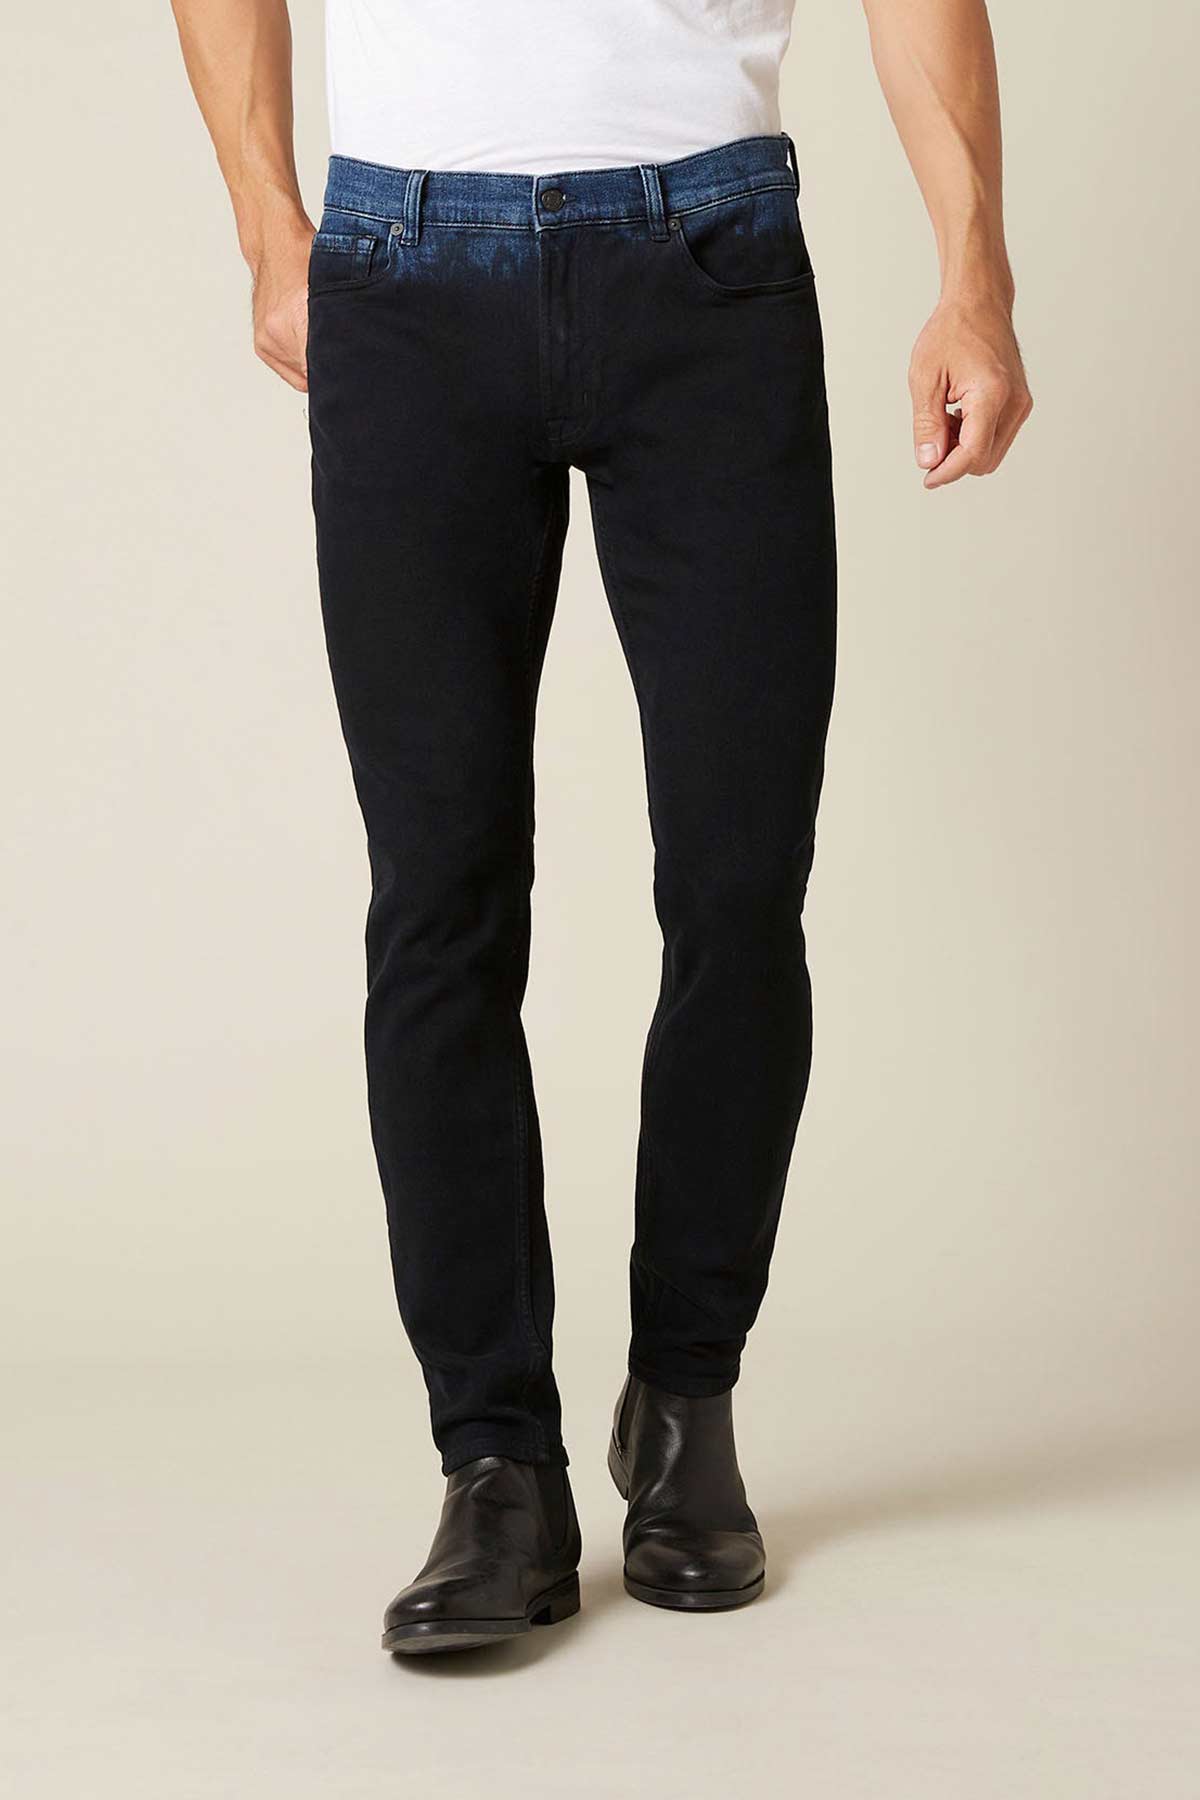 7 For All Mankind Ronnie Tapered Jeans-Libas Trendy Fashion Store